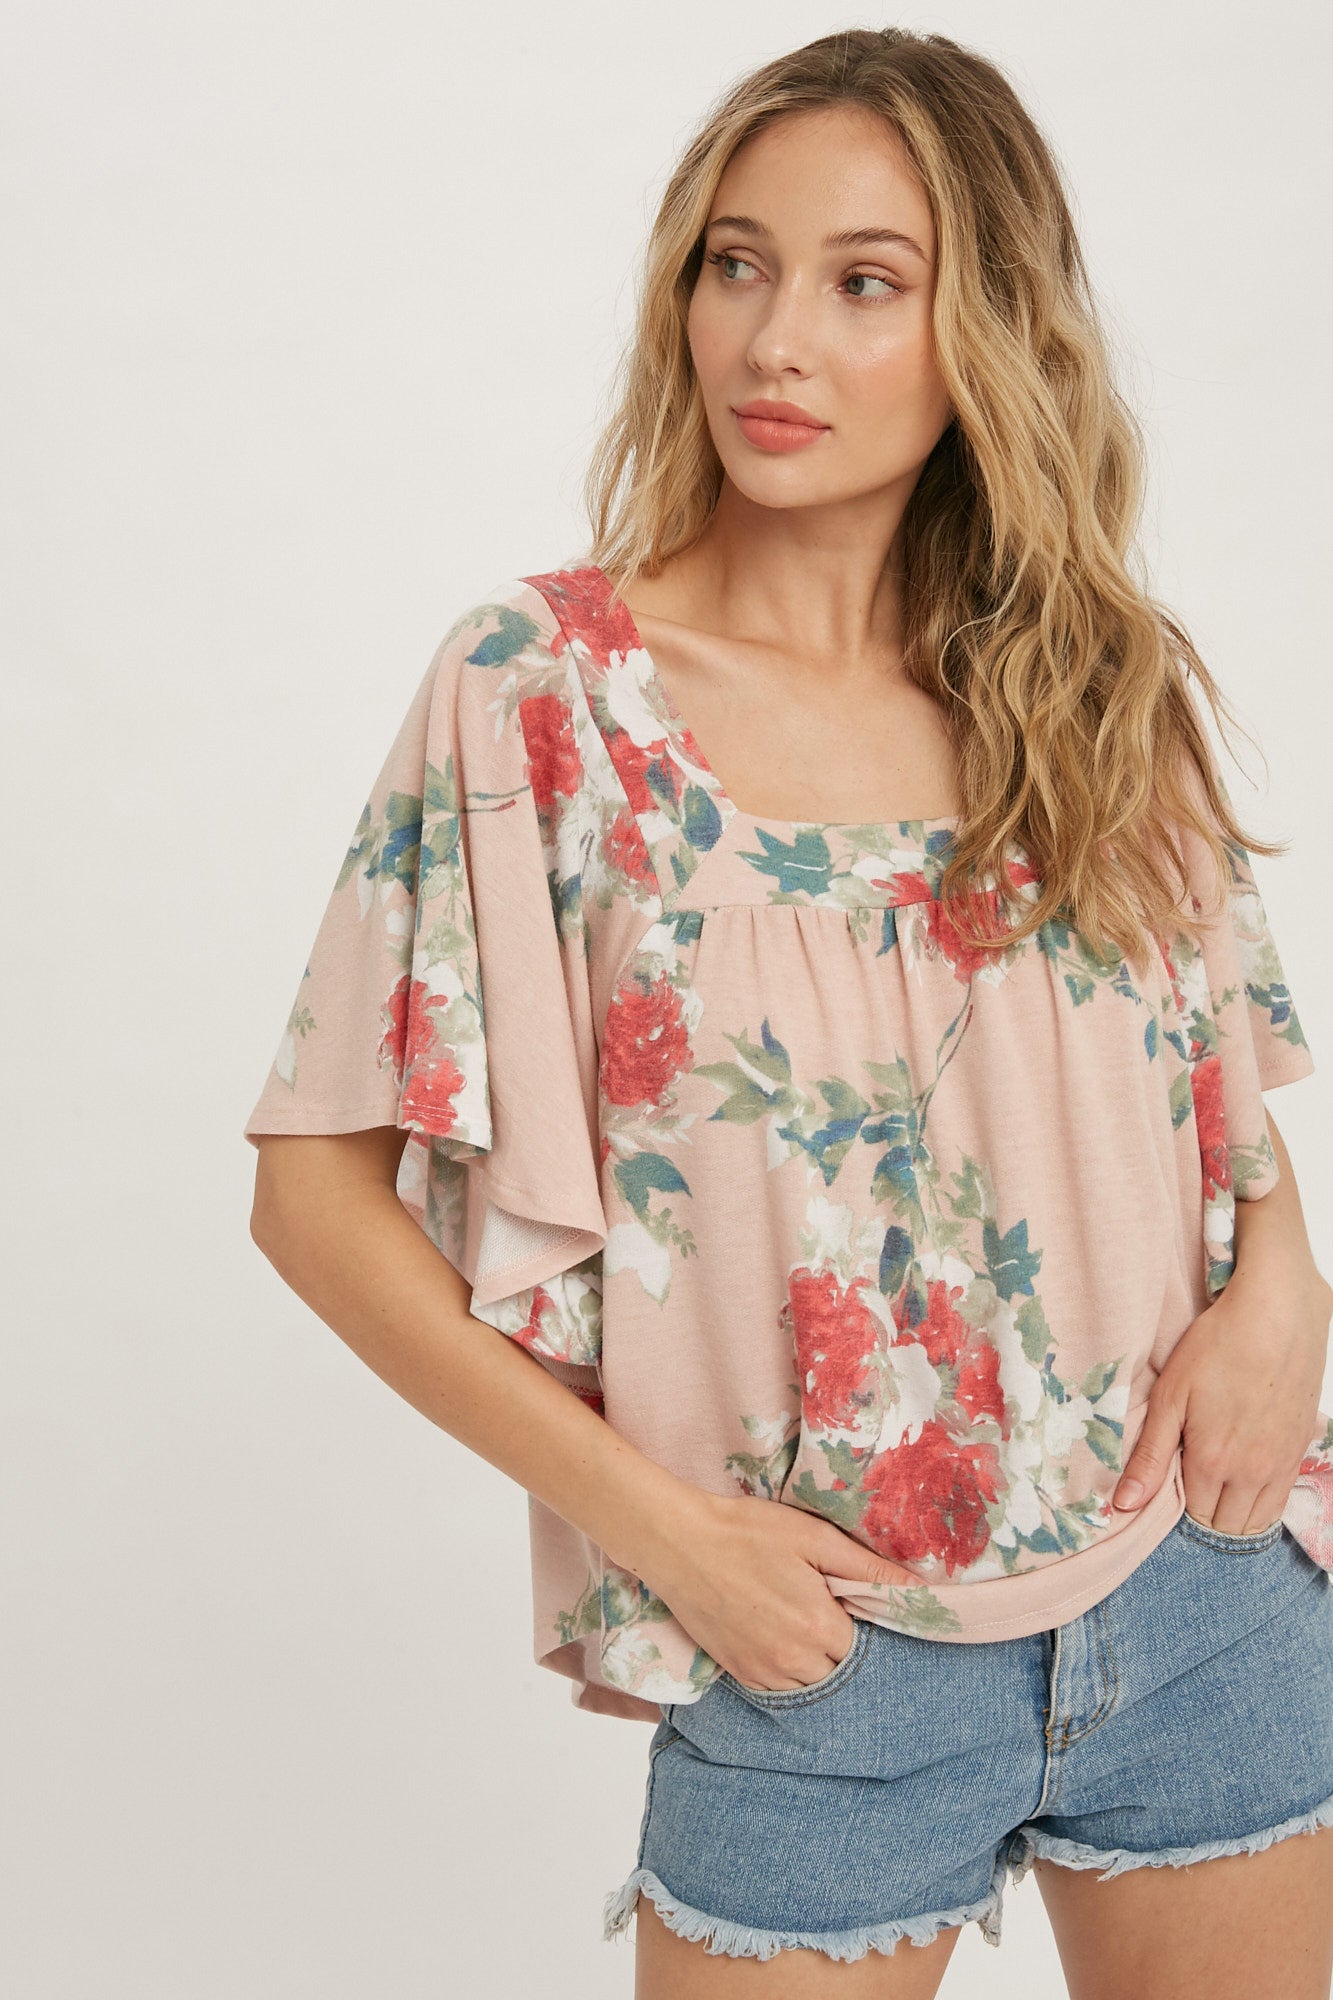 Floral Print Butterfly Top